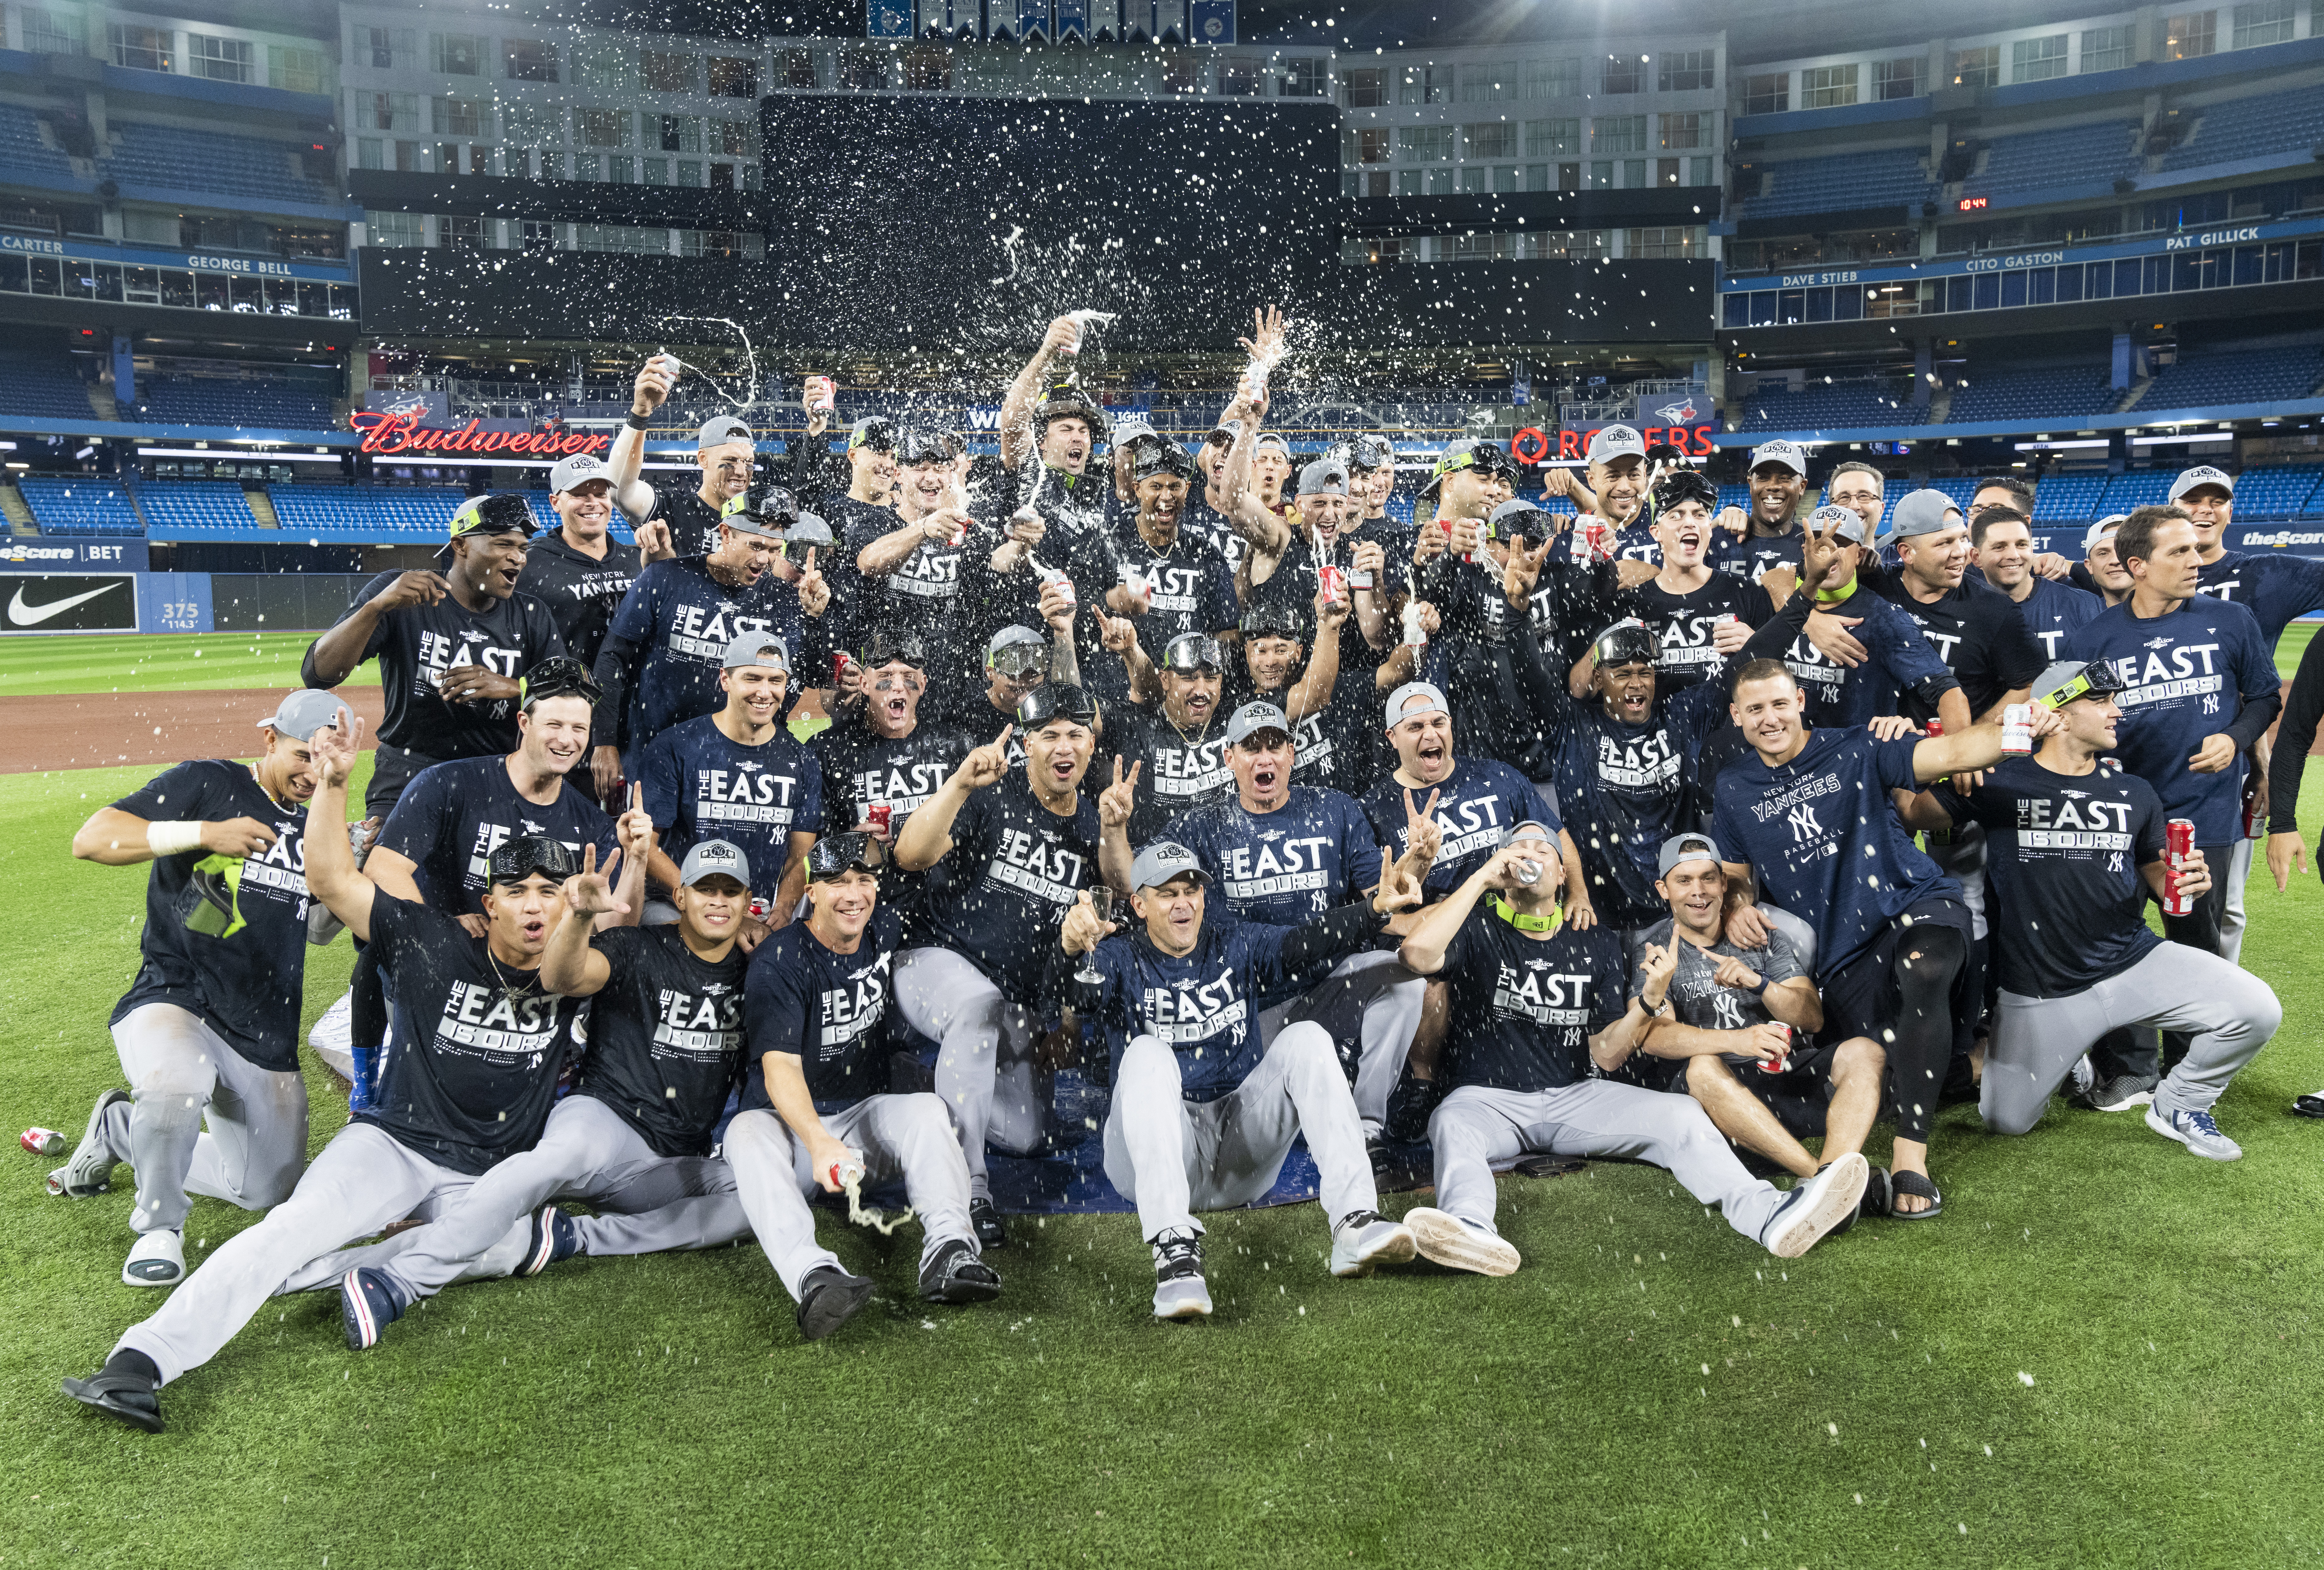 The New York Yankees celebrate winning the MLB American League East title after the 5-2 win over the Toronto Blue Jays at Rogers Centre in Toronto, Canada, September 27, 2022. /CFP